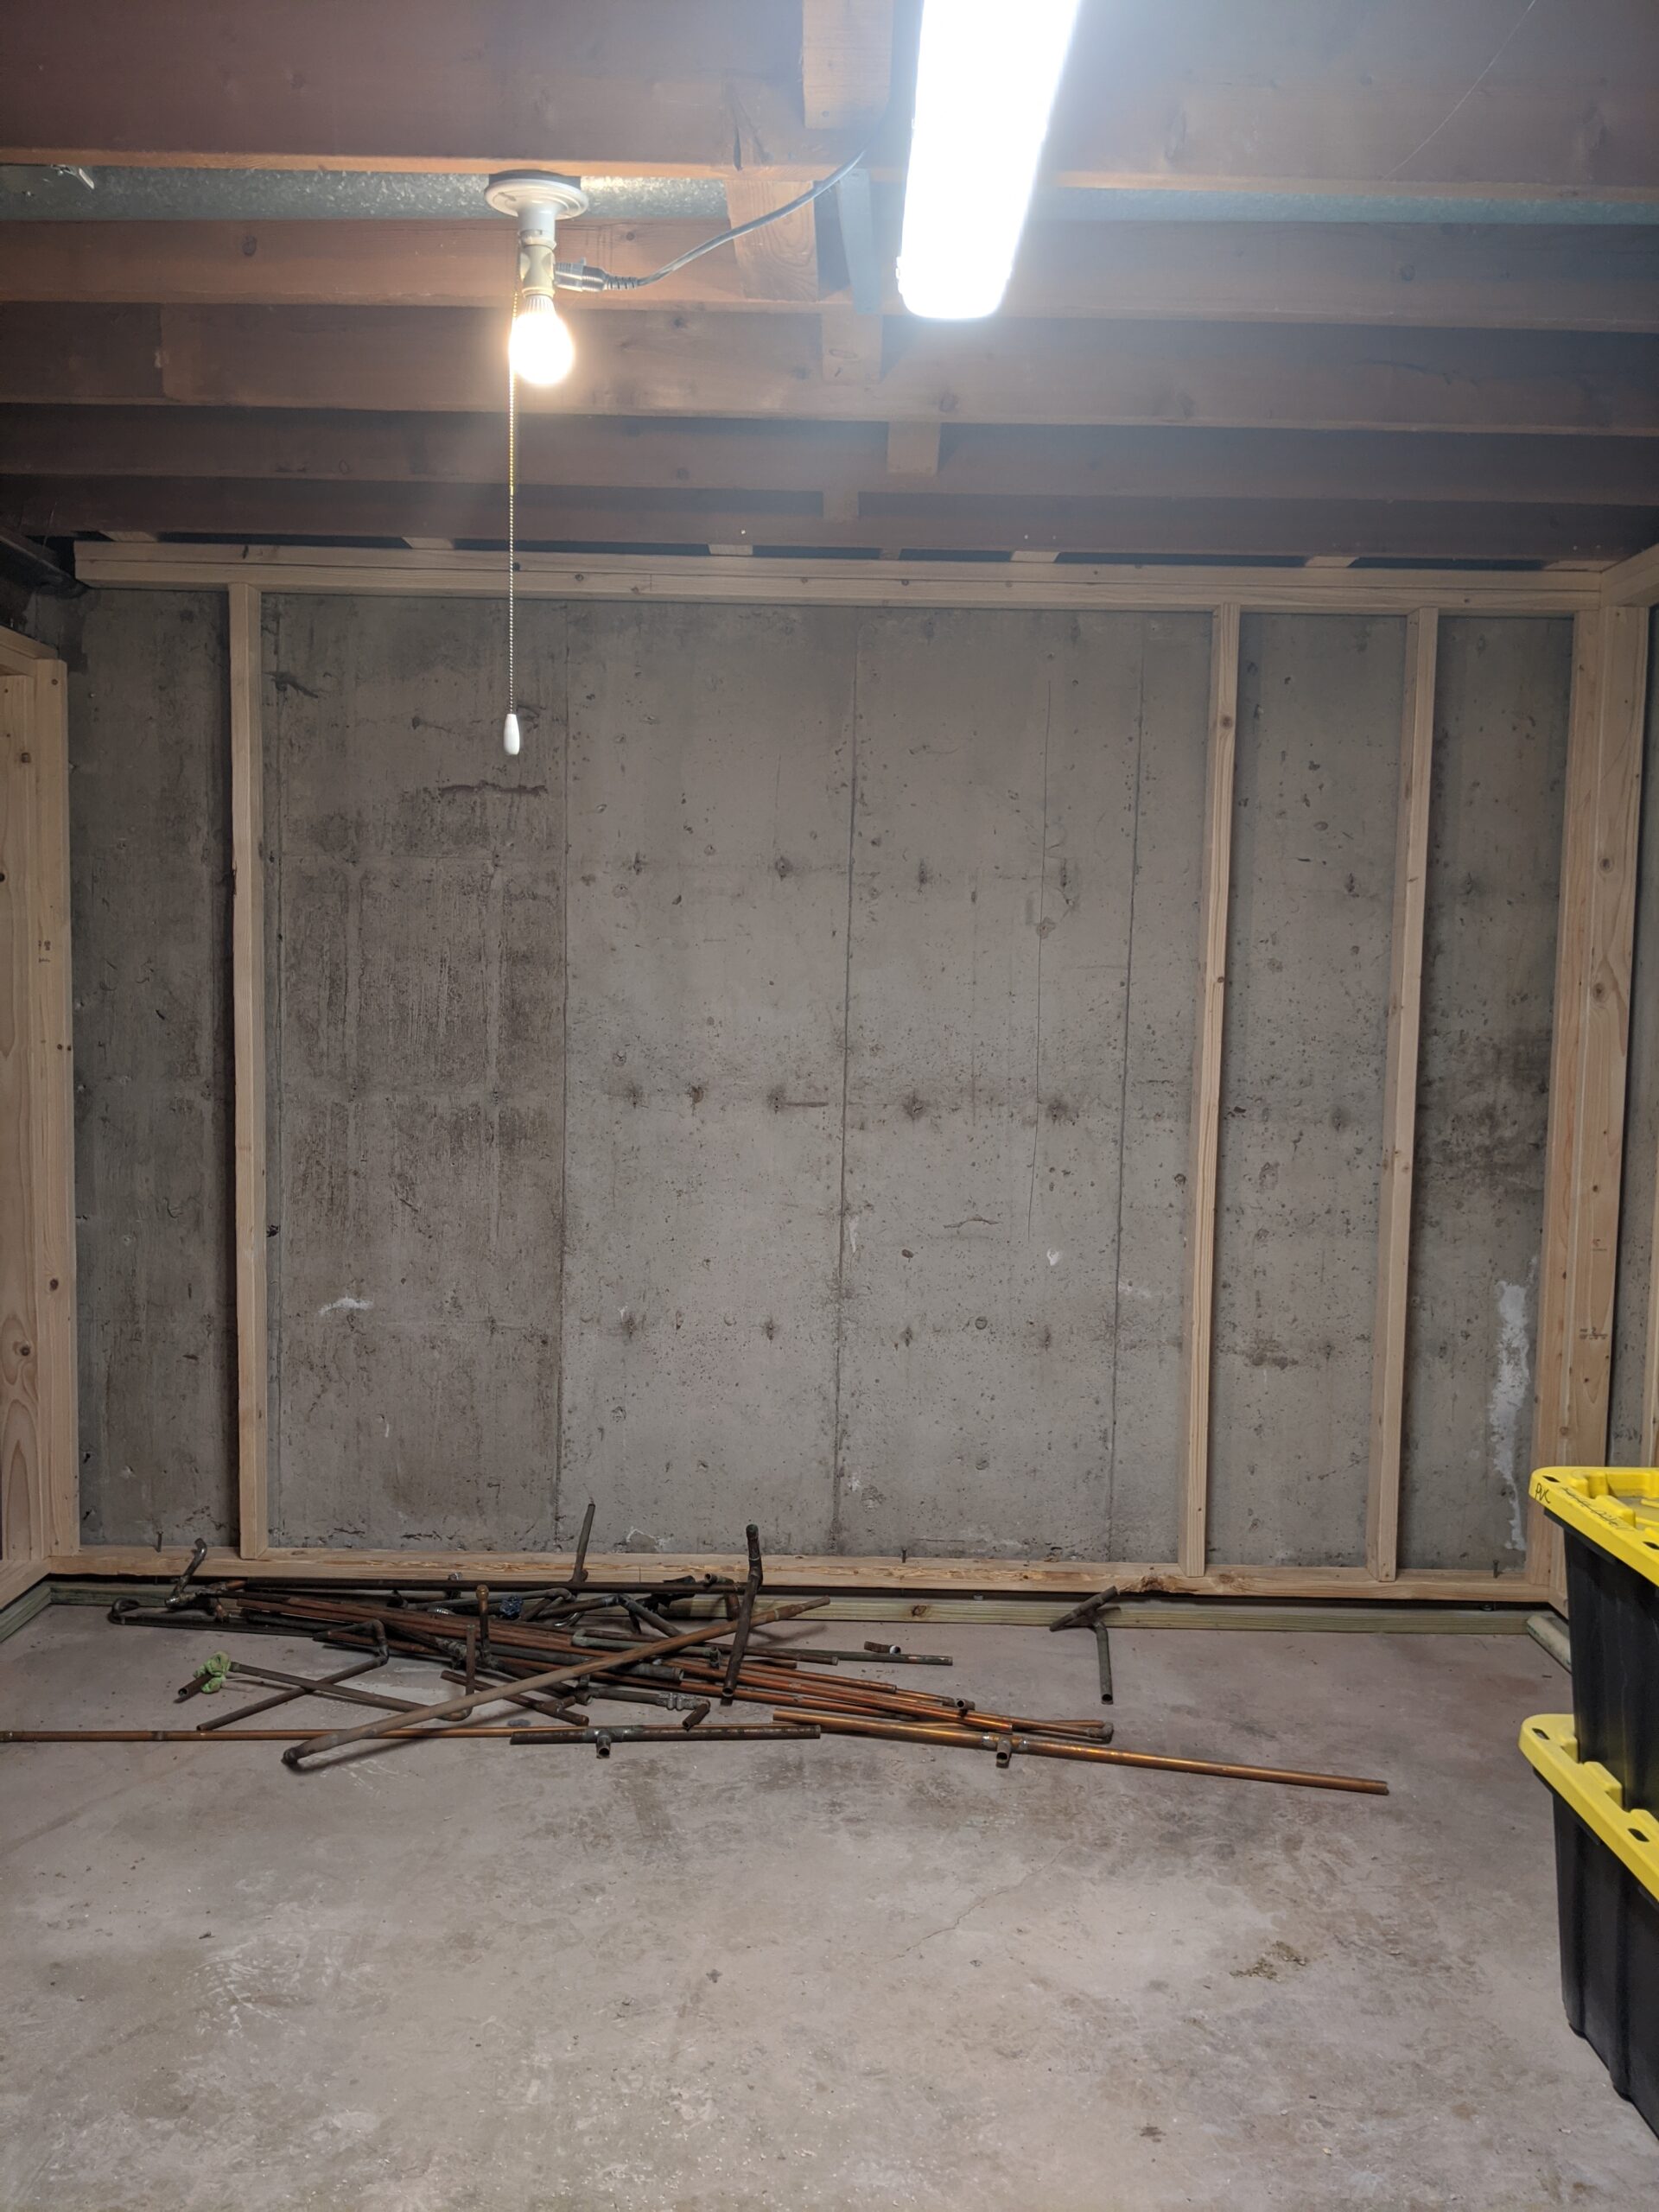 BEFORE: There was no existing window in the wall where we wanted to add the second basement bedroom, so we had to “force” one in this blank wall.